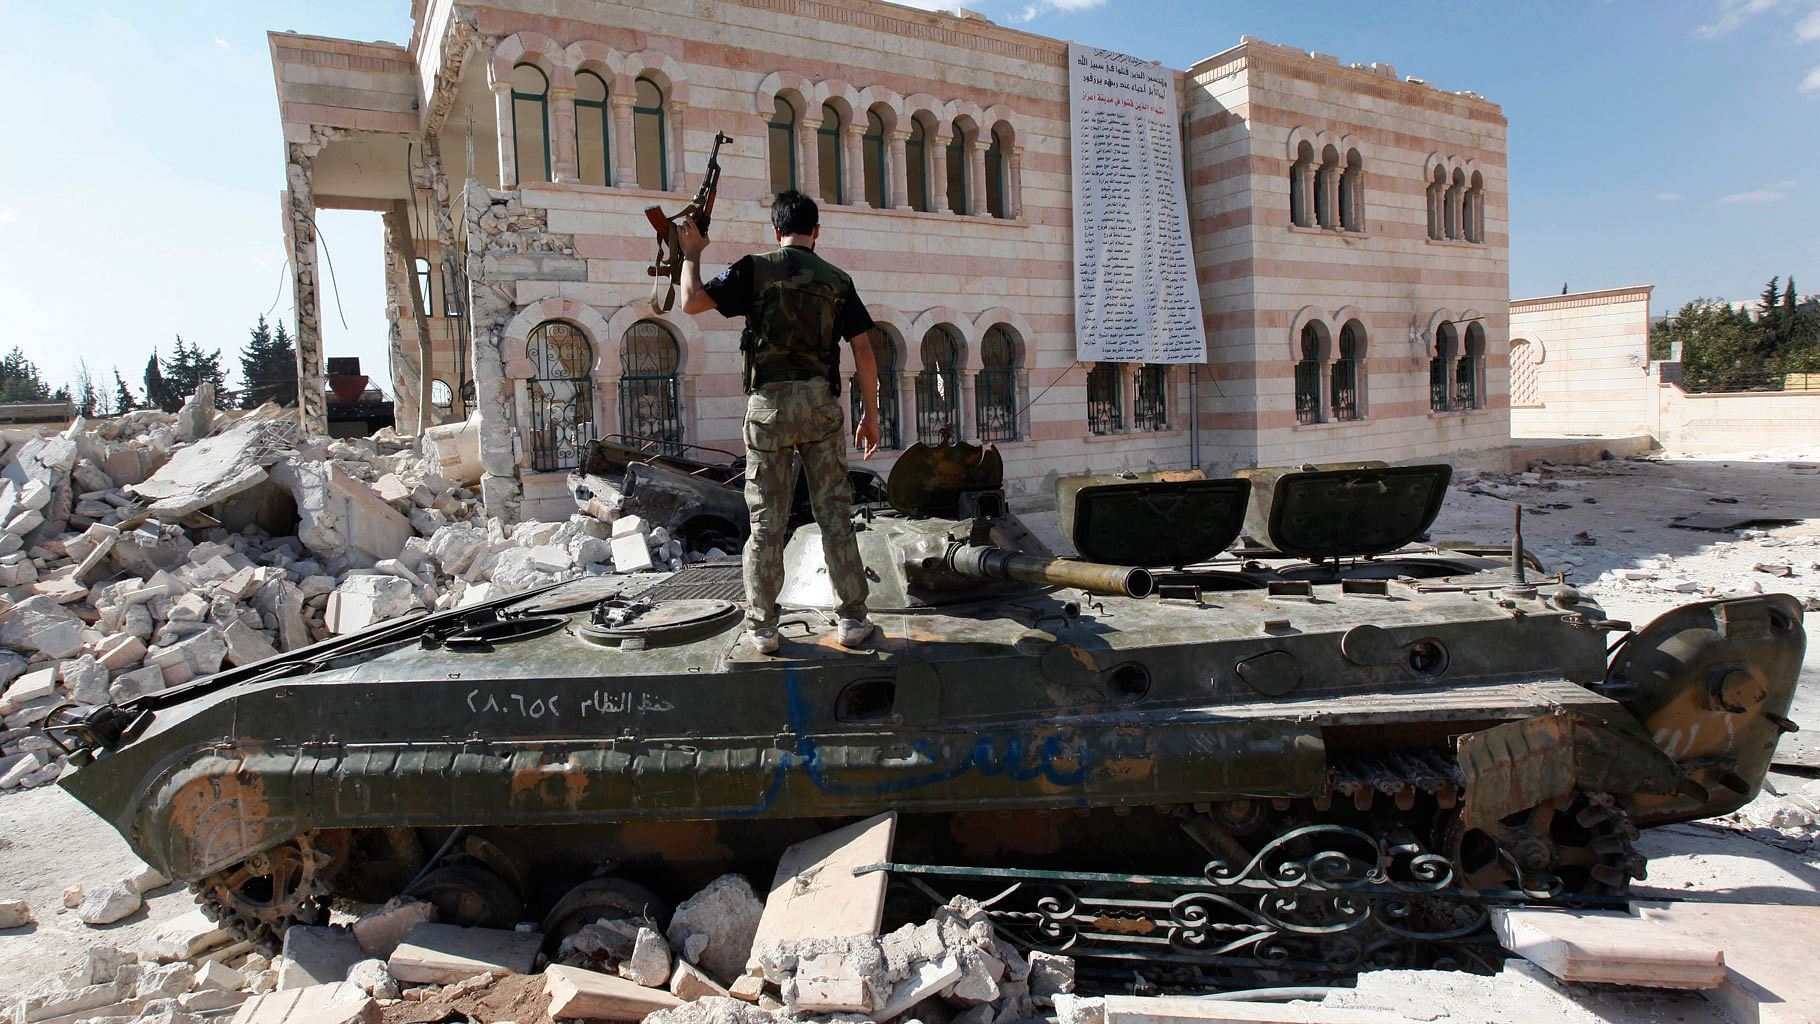 

Free Syrian Army soldier stands on a damaged Syrian military tank in front of a damaged mosque on the outskirts of Aleppo. (Photo: AP)